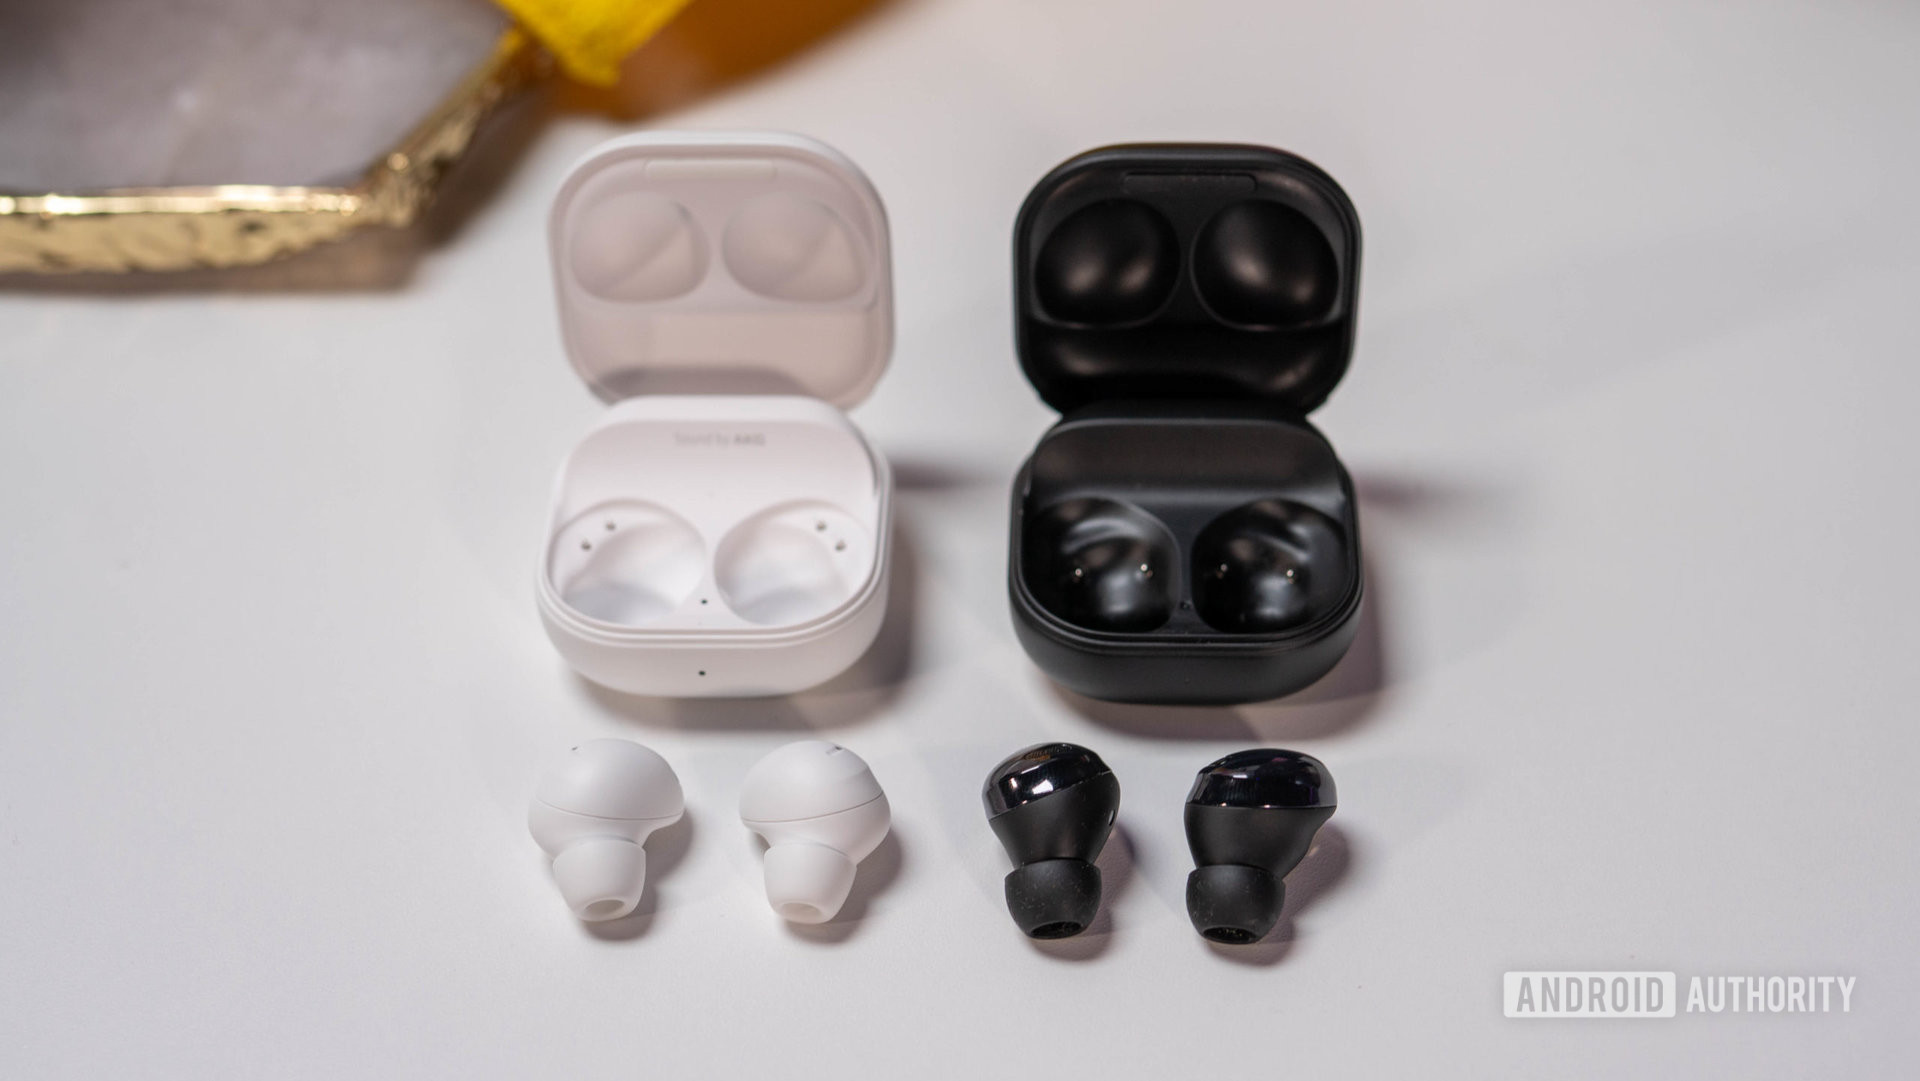 The Samsung Galaxy Buds 2 Pro and Samsung Galaxy Buds Pro laying on table with their charging cases above them.